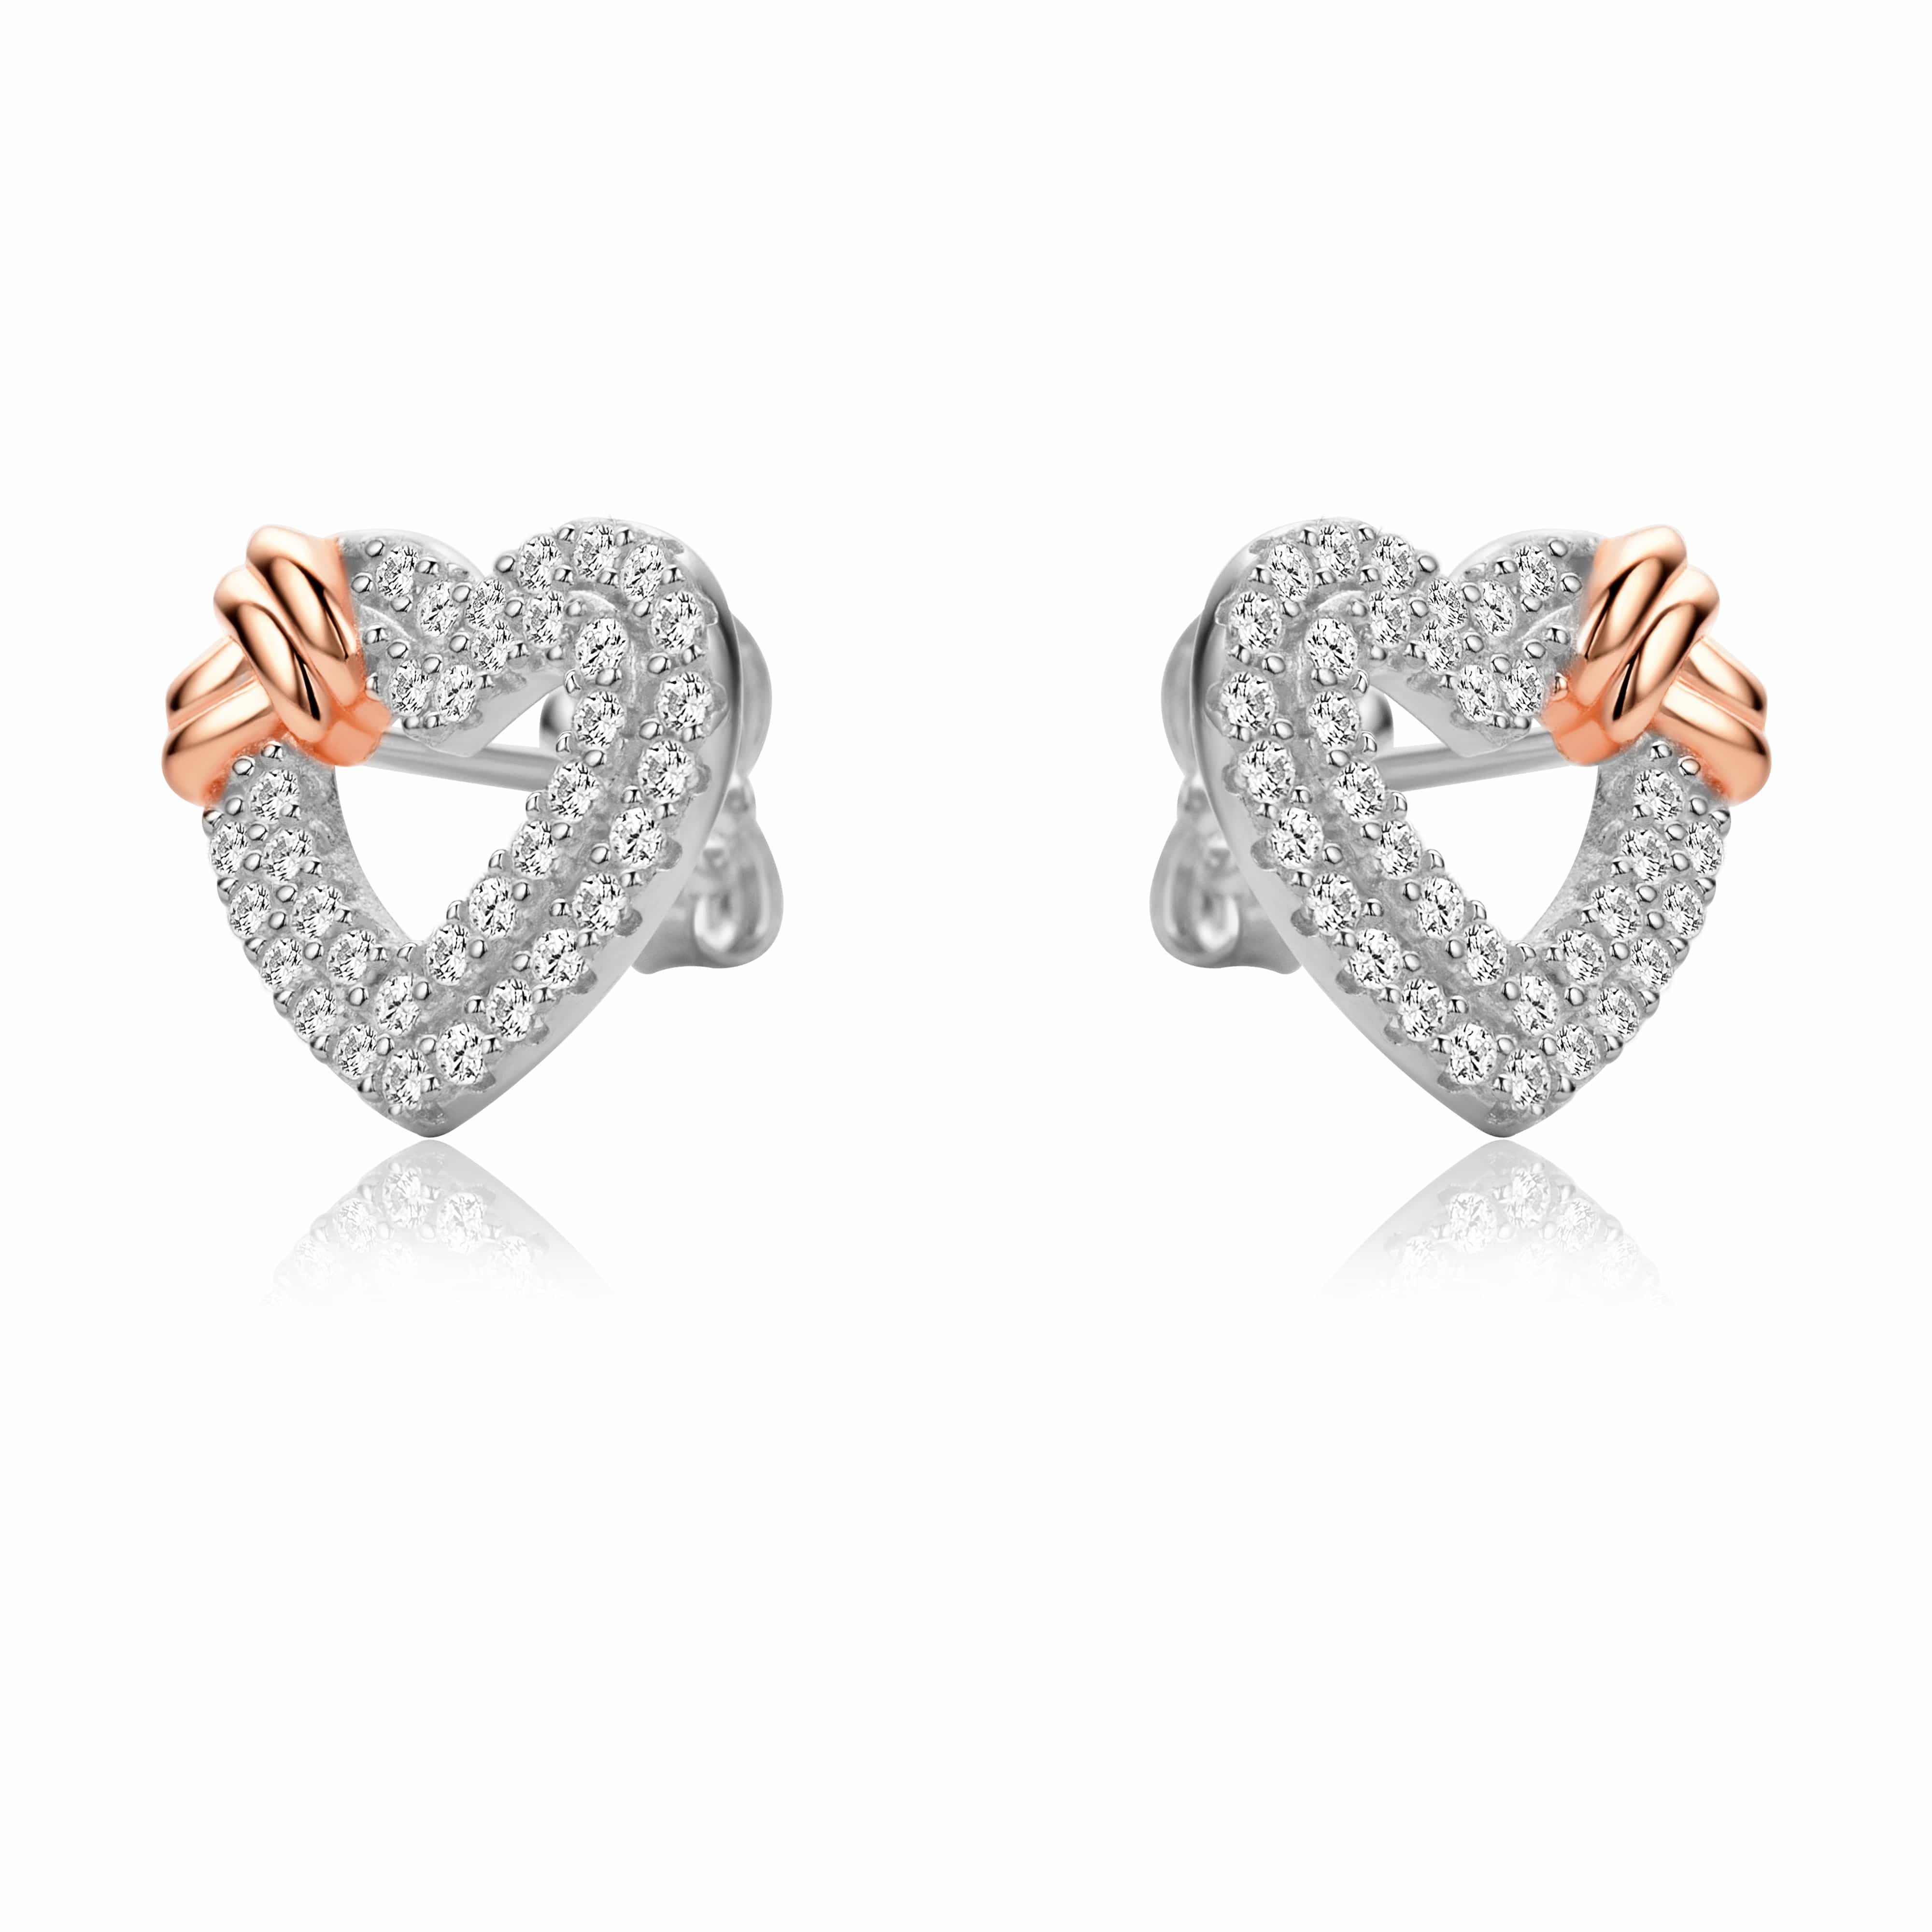 Lynora Jewellery Earring Rose Gold Plate Rose Gold Detail Heart Earrings Rose Gold Plate